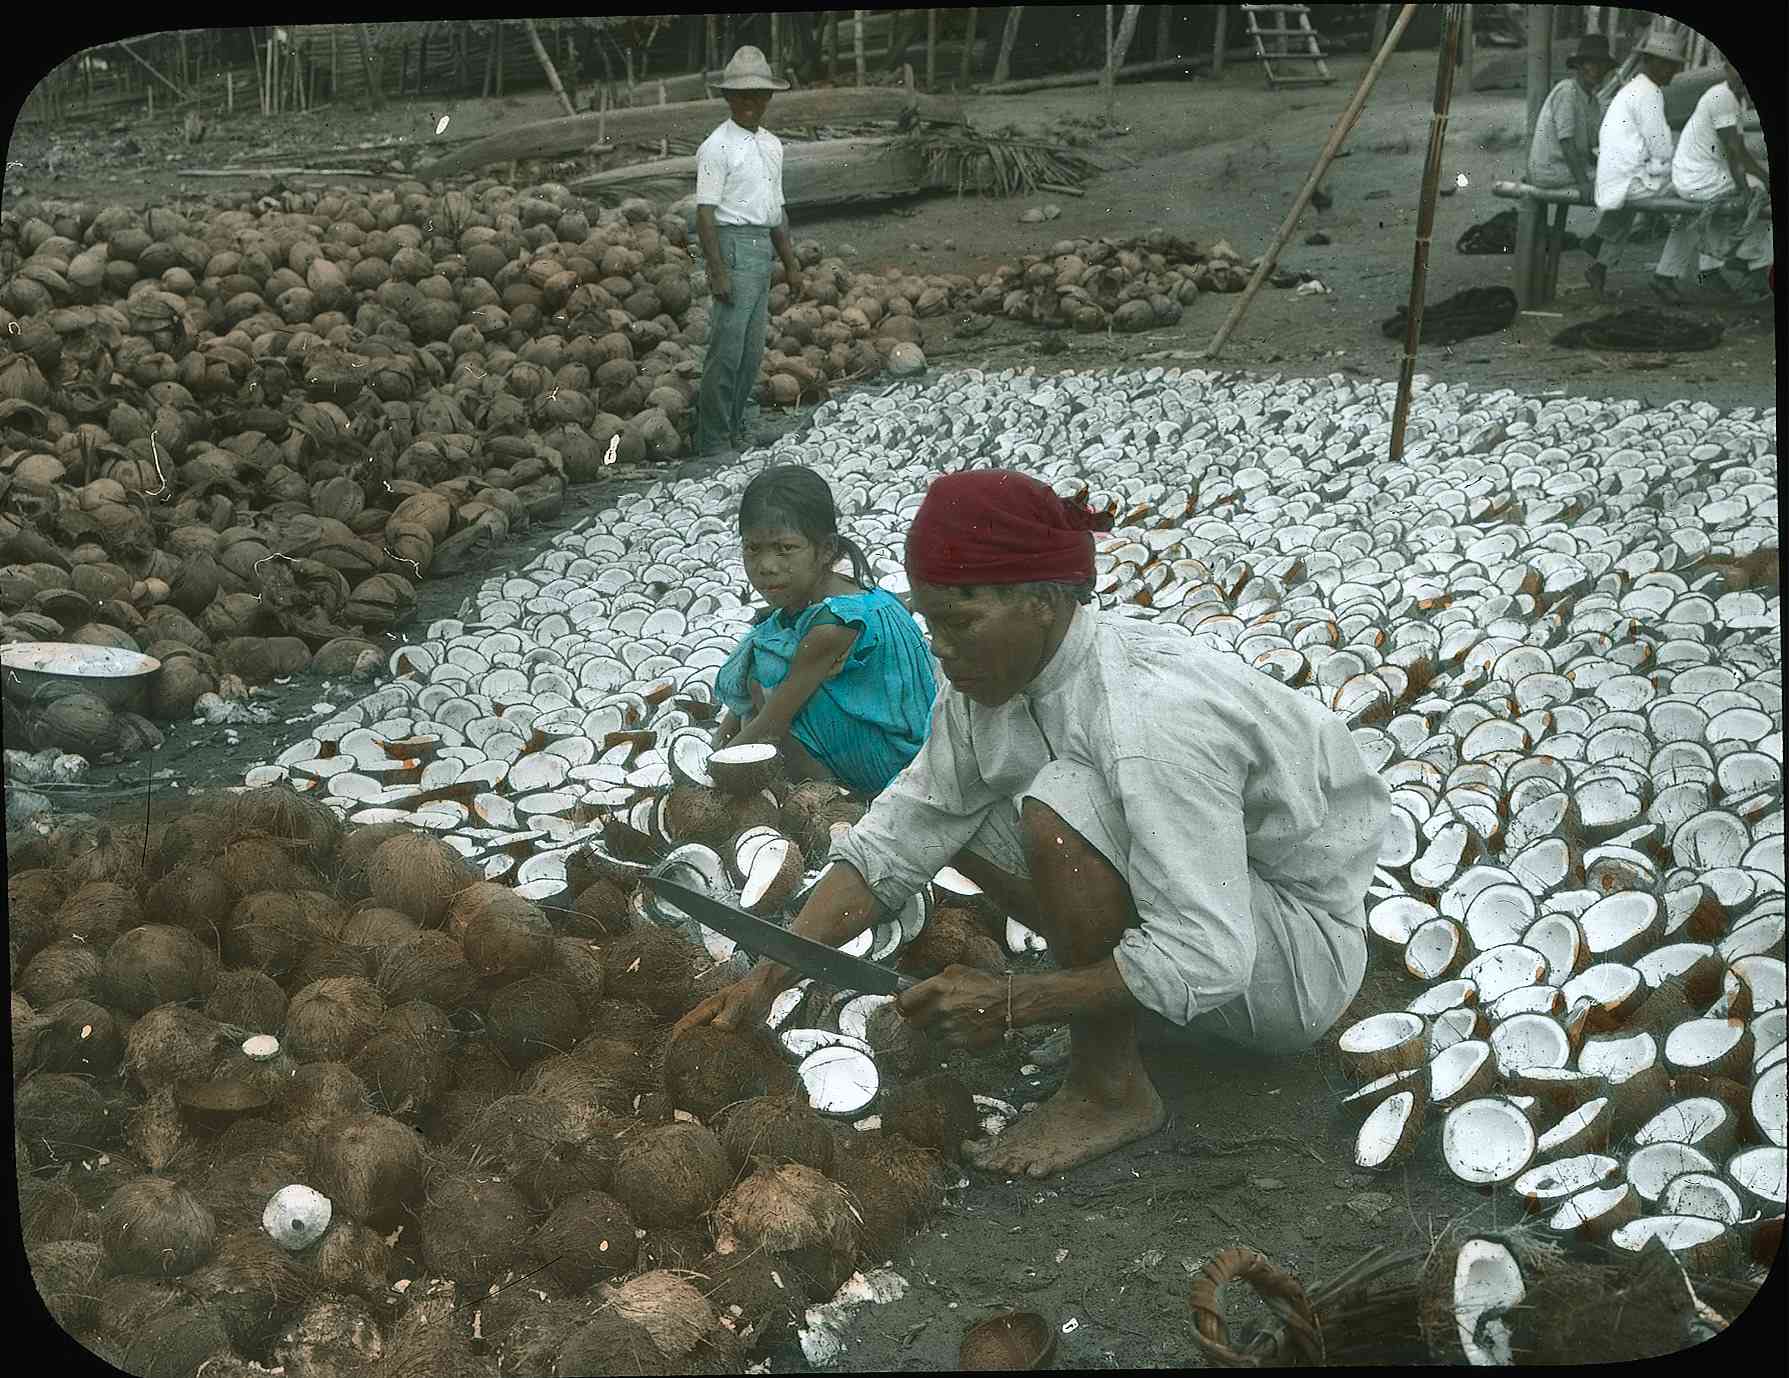 Two Filipino people squat as they split open coconuts with a large knife. One of the people, a young girl, looks towards the camera. The other person holds a knife in his left hand as he works. Behind the two individuals are rows of open coconuts. There are many coconuts on the ground where they work. A man and some others, dressed in white shirts and a hat, observe them as they work.